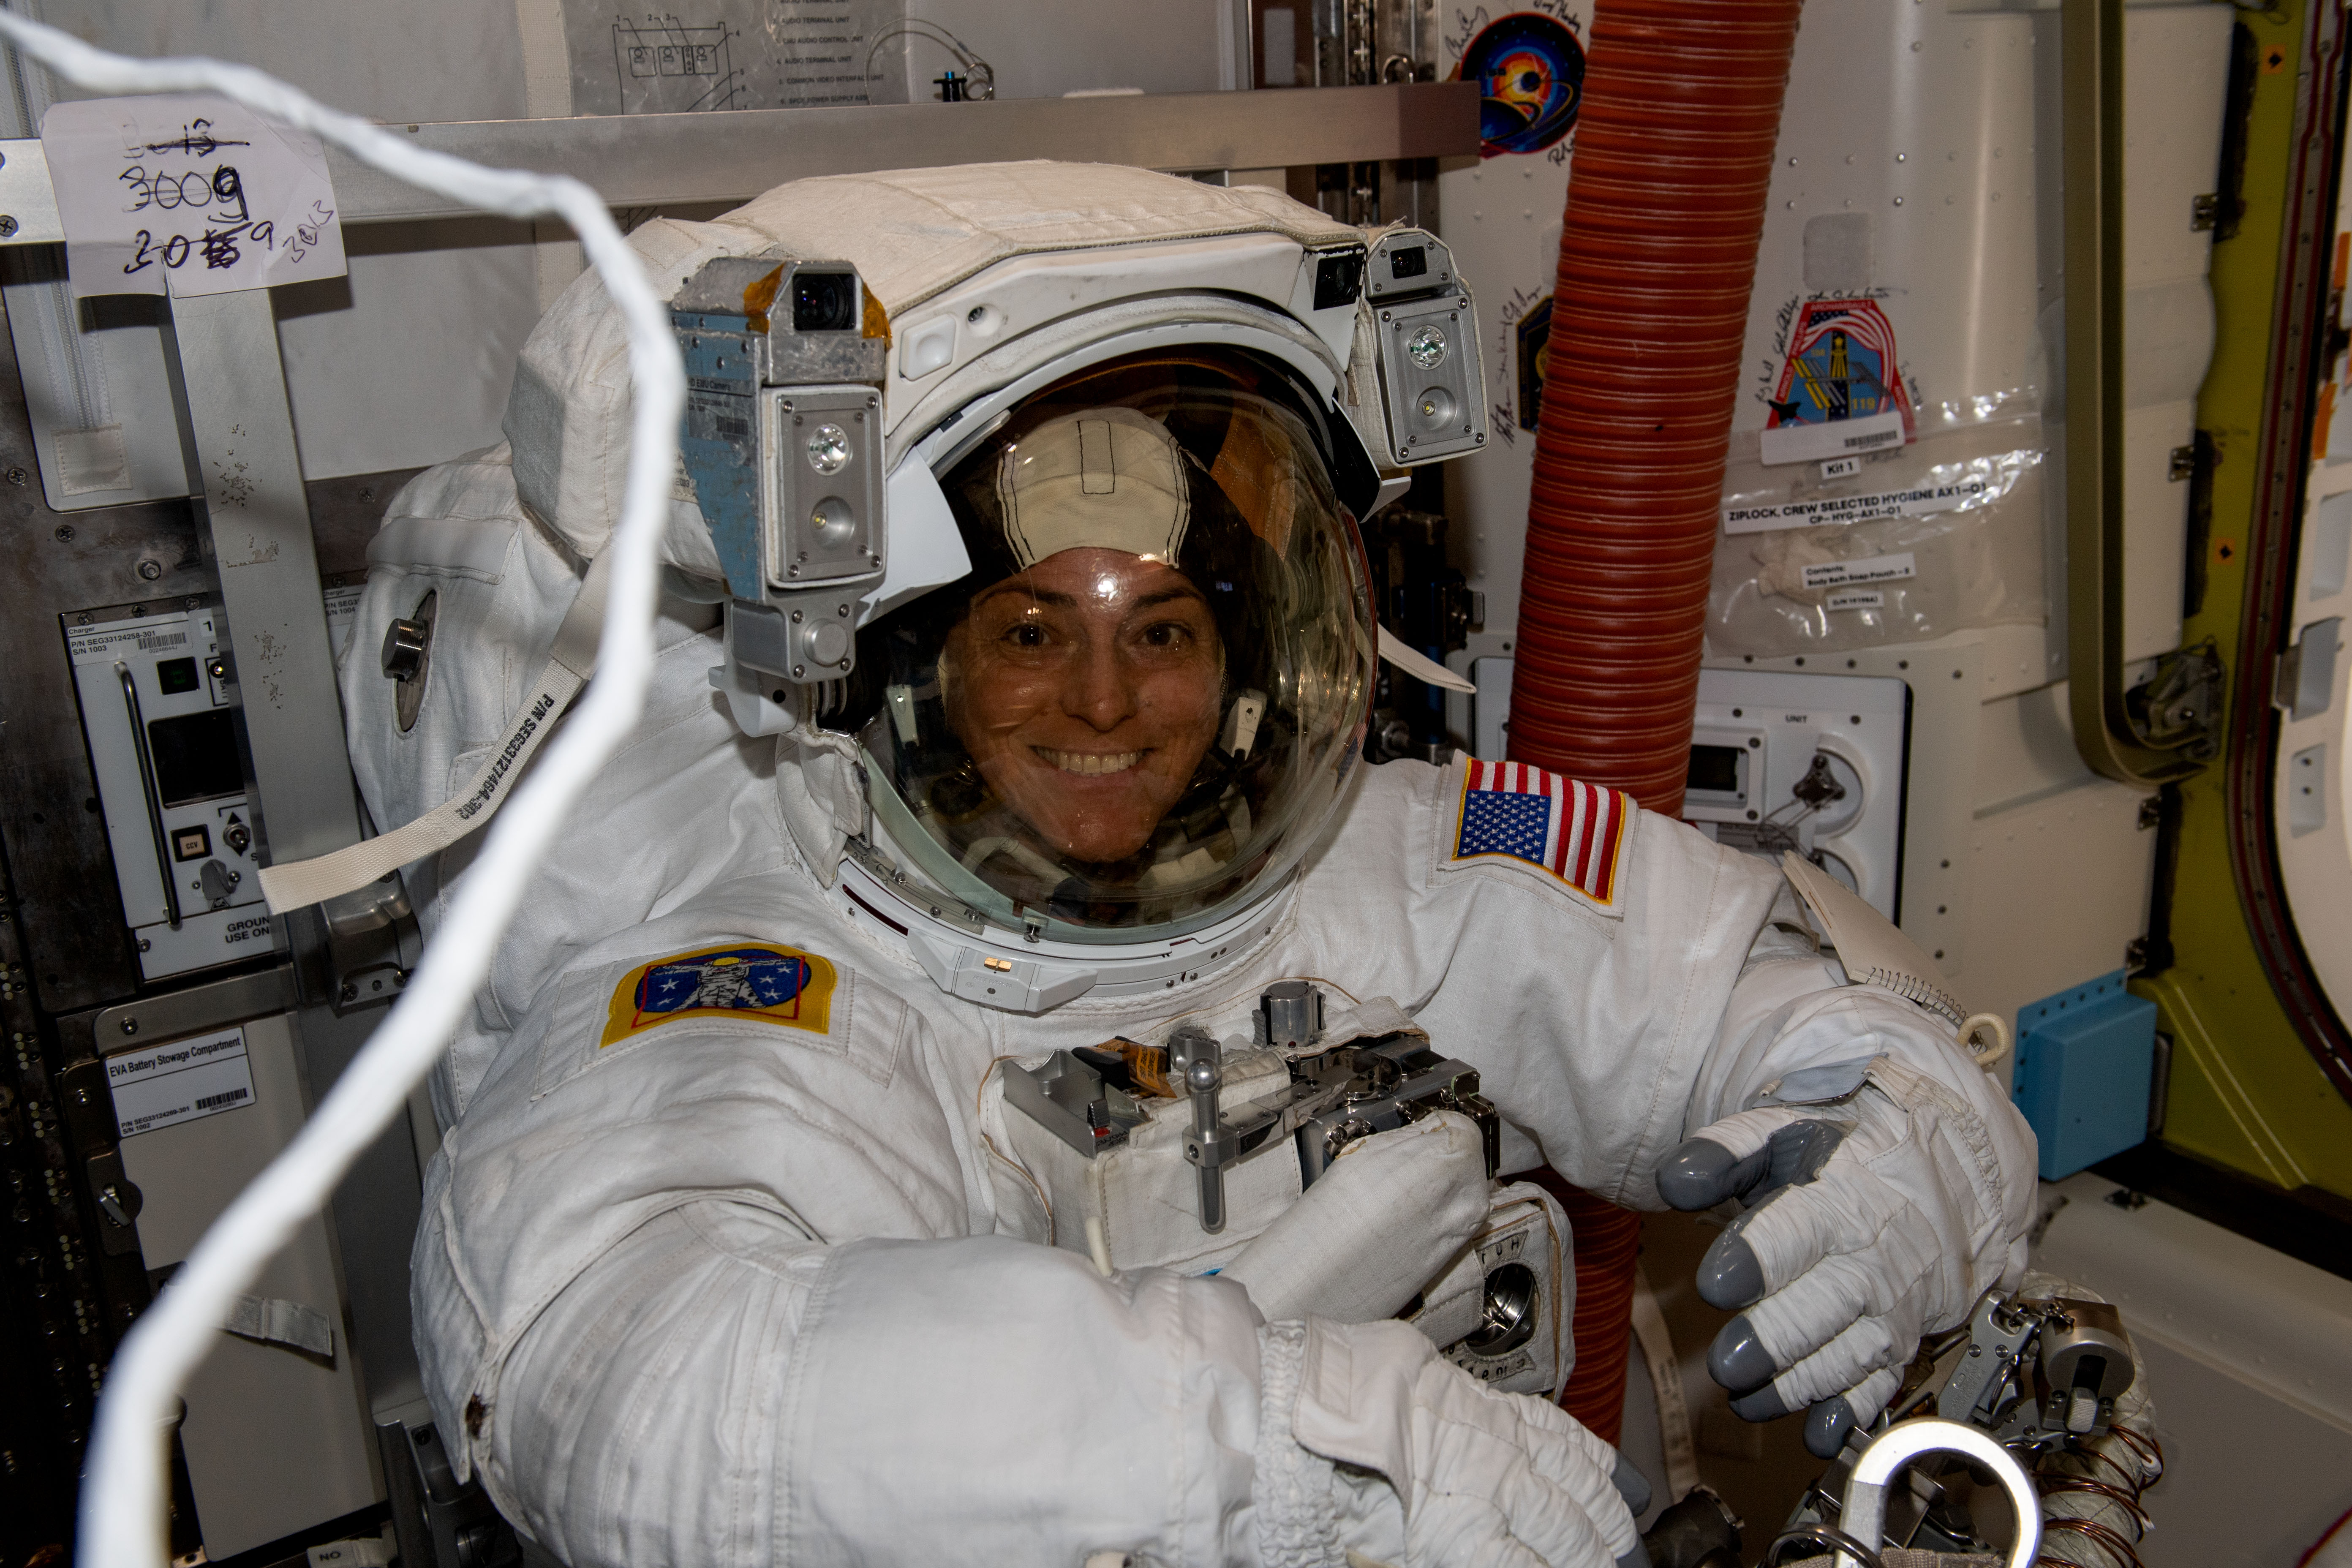 Astronaut Nicole Mann faces the camera and smiles. She is wearing a white spacesuit, which has an American flag patch on the left arm, and another patch on the right arm.